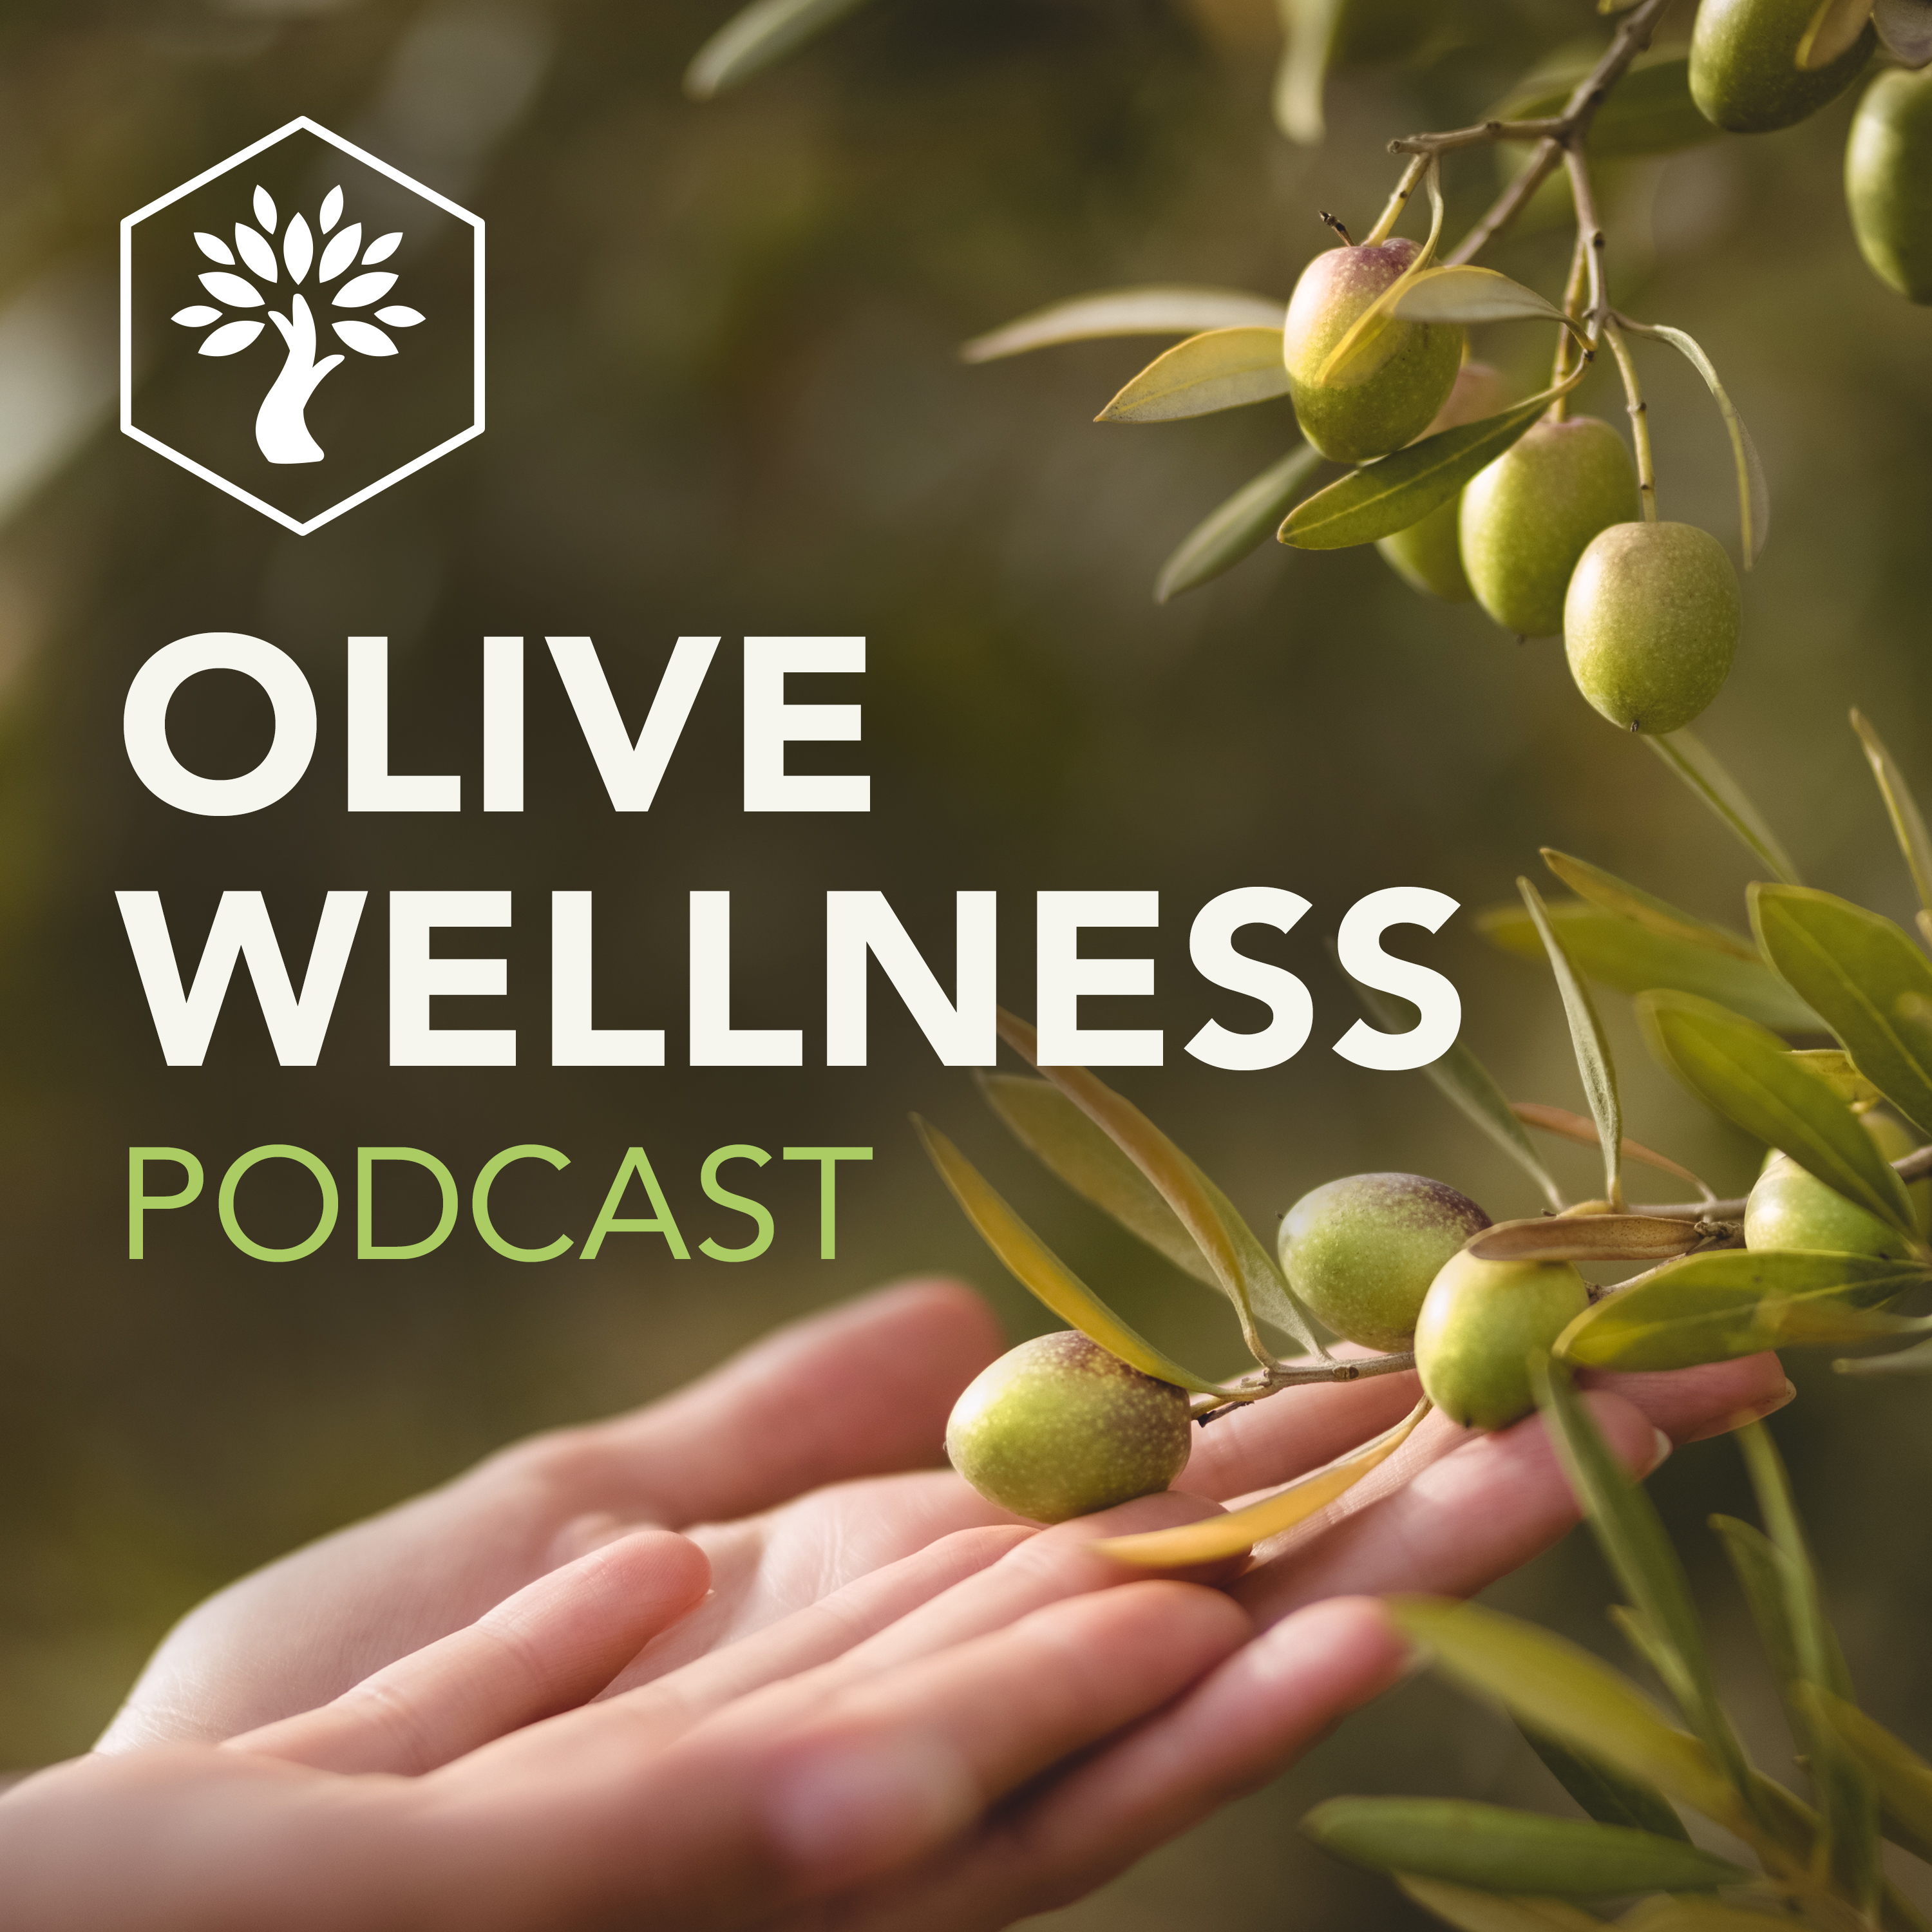 Antioxidants found in olive leaf extract